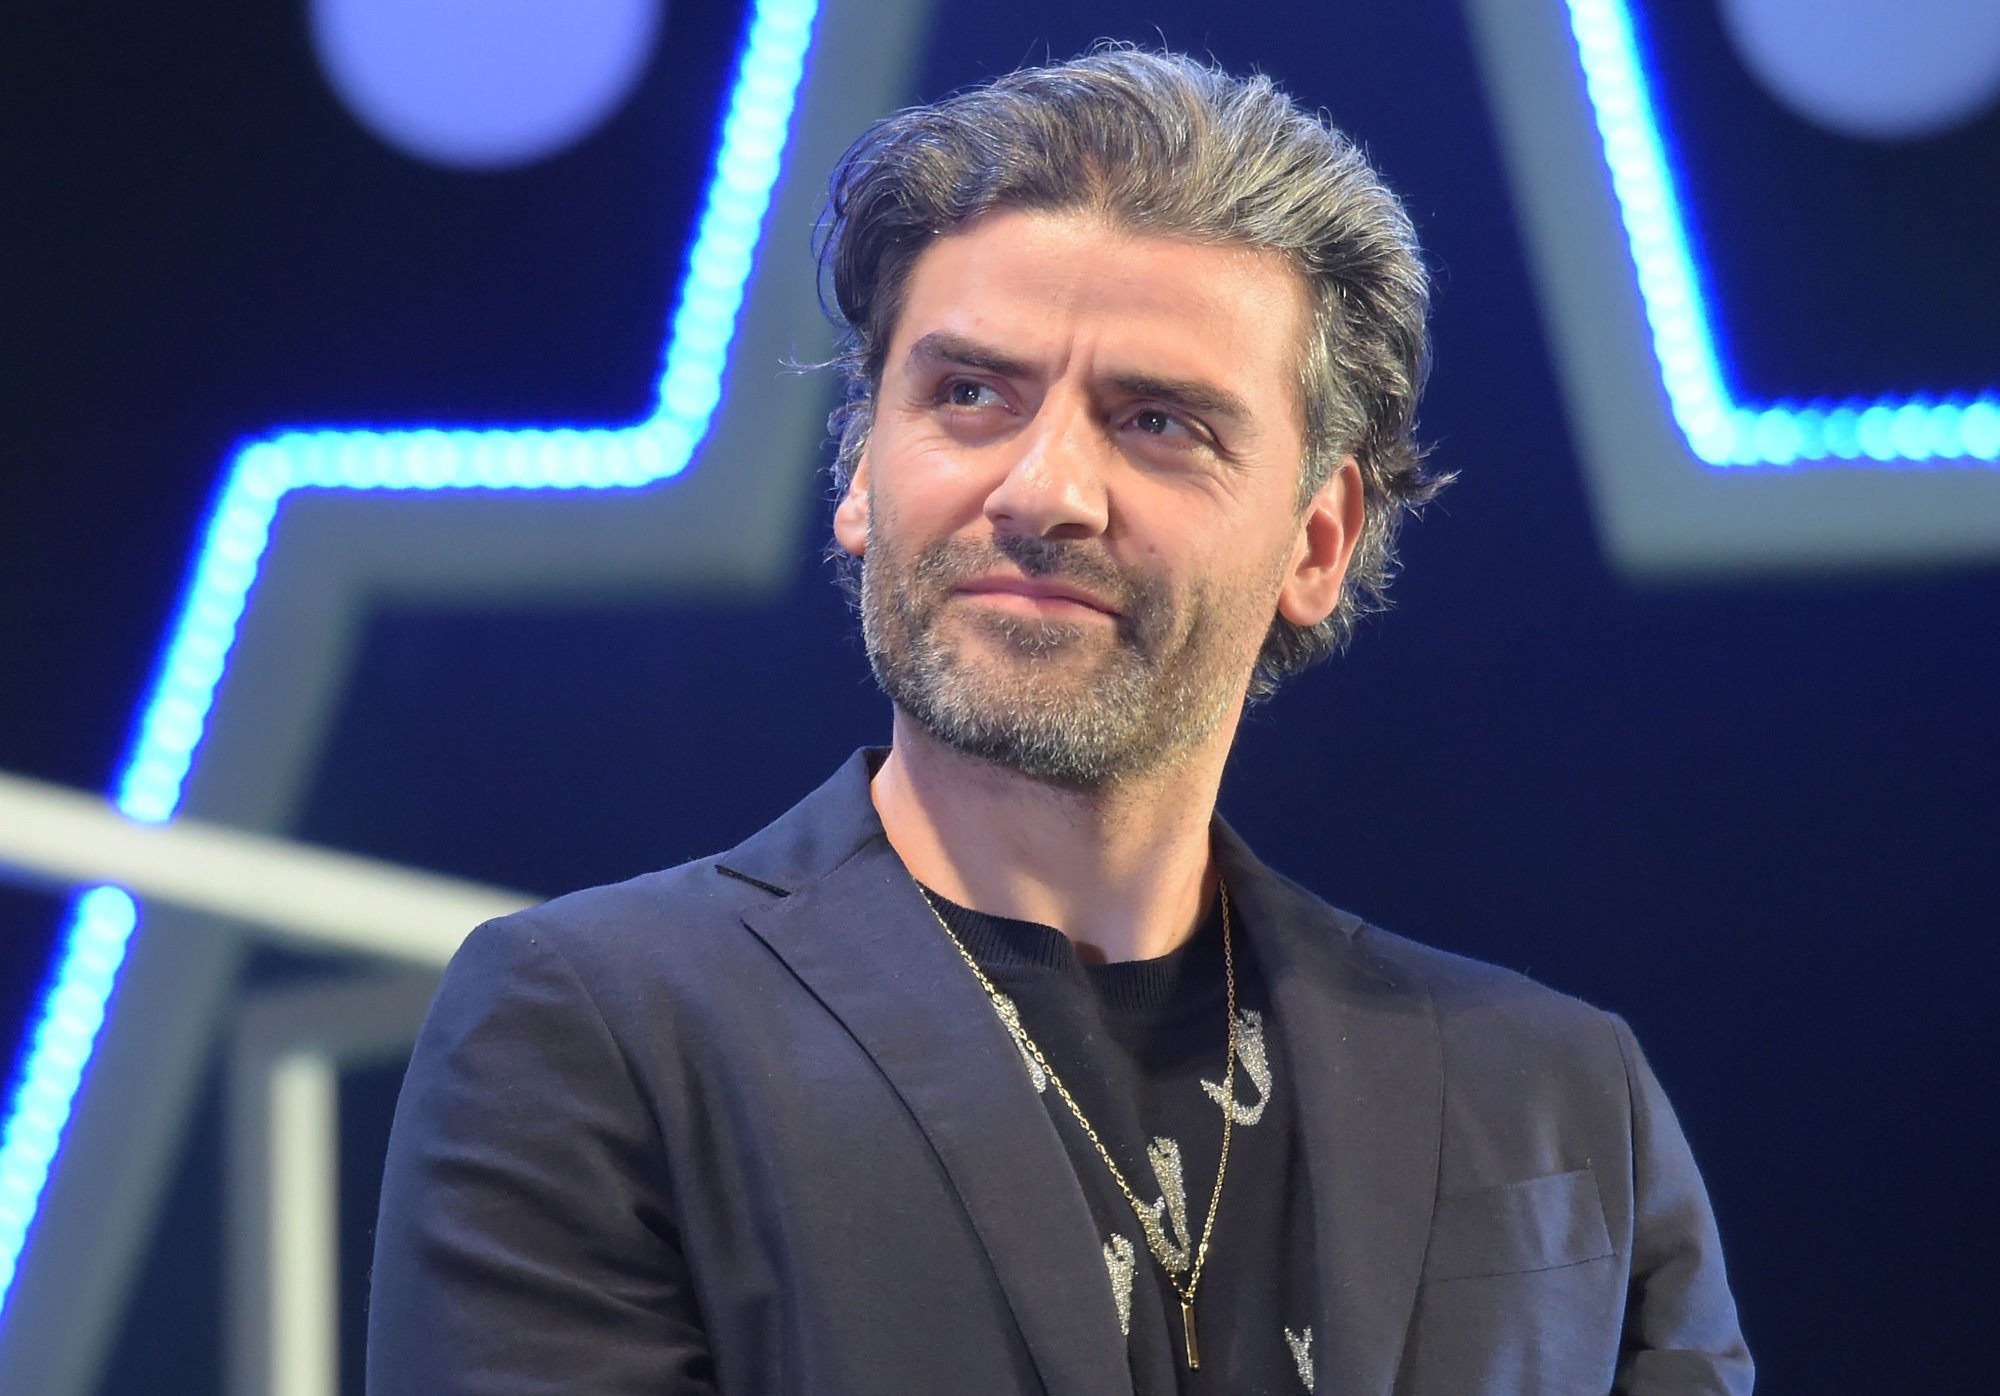 'Star Wars' Oscar Isaac plays Poe Dameron wearing a gold necklace looking to the side